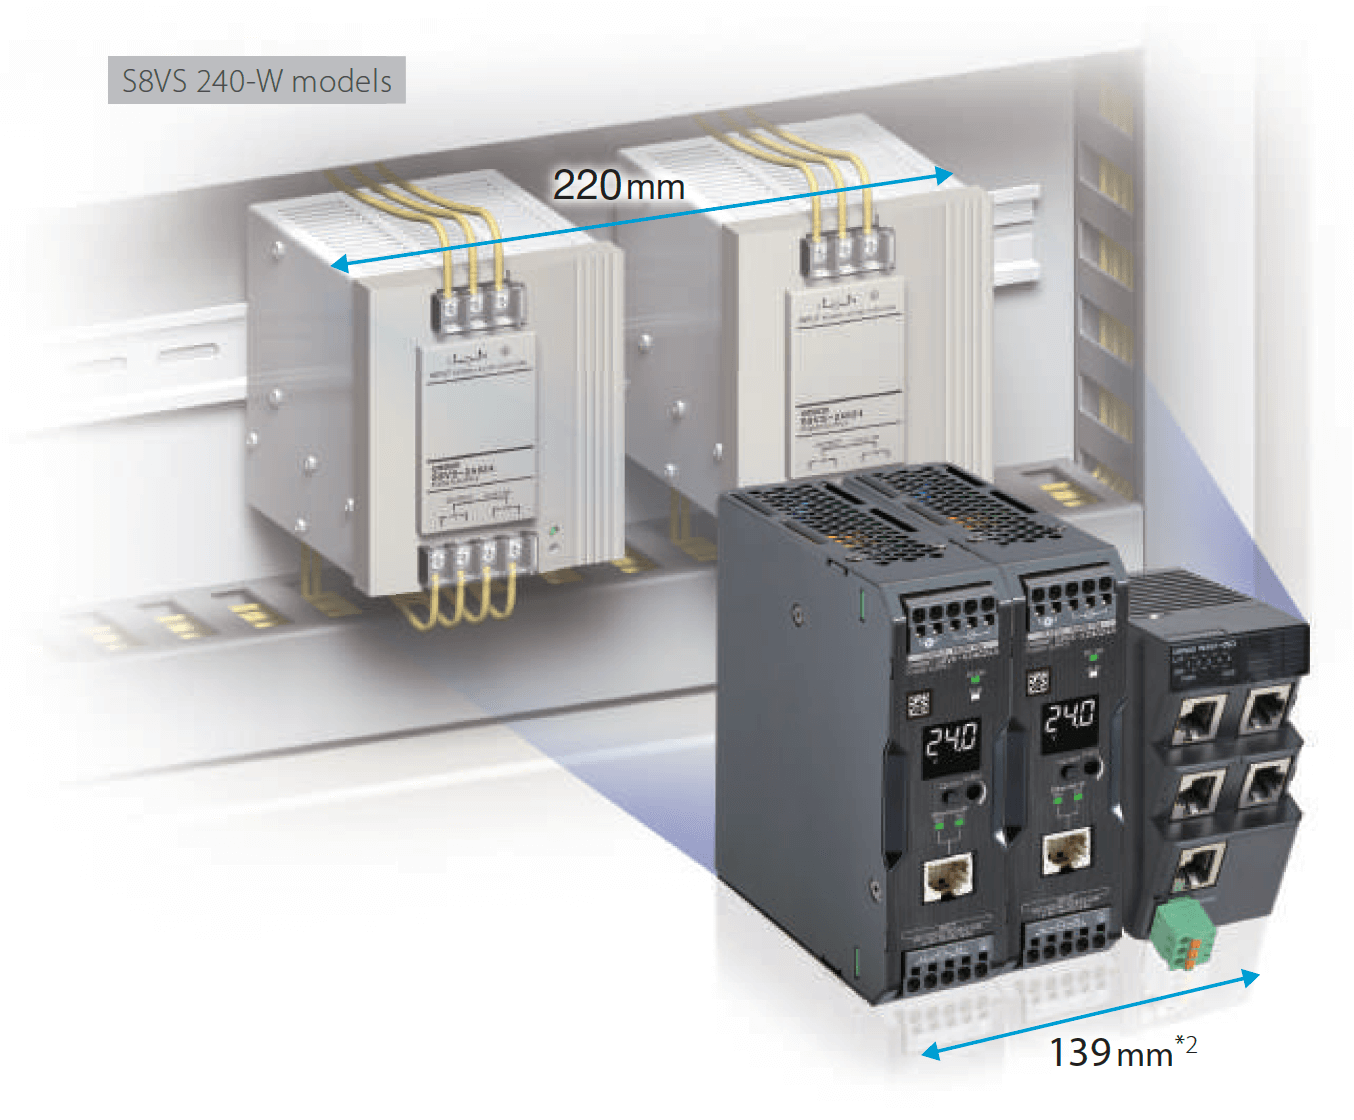 World’s smallest class*1 of power supplies with a communication function